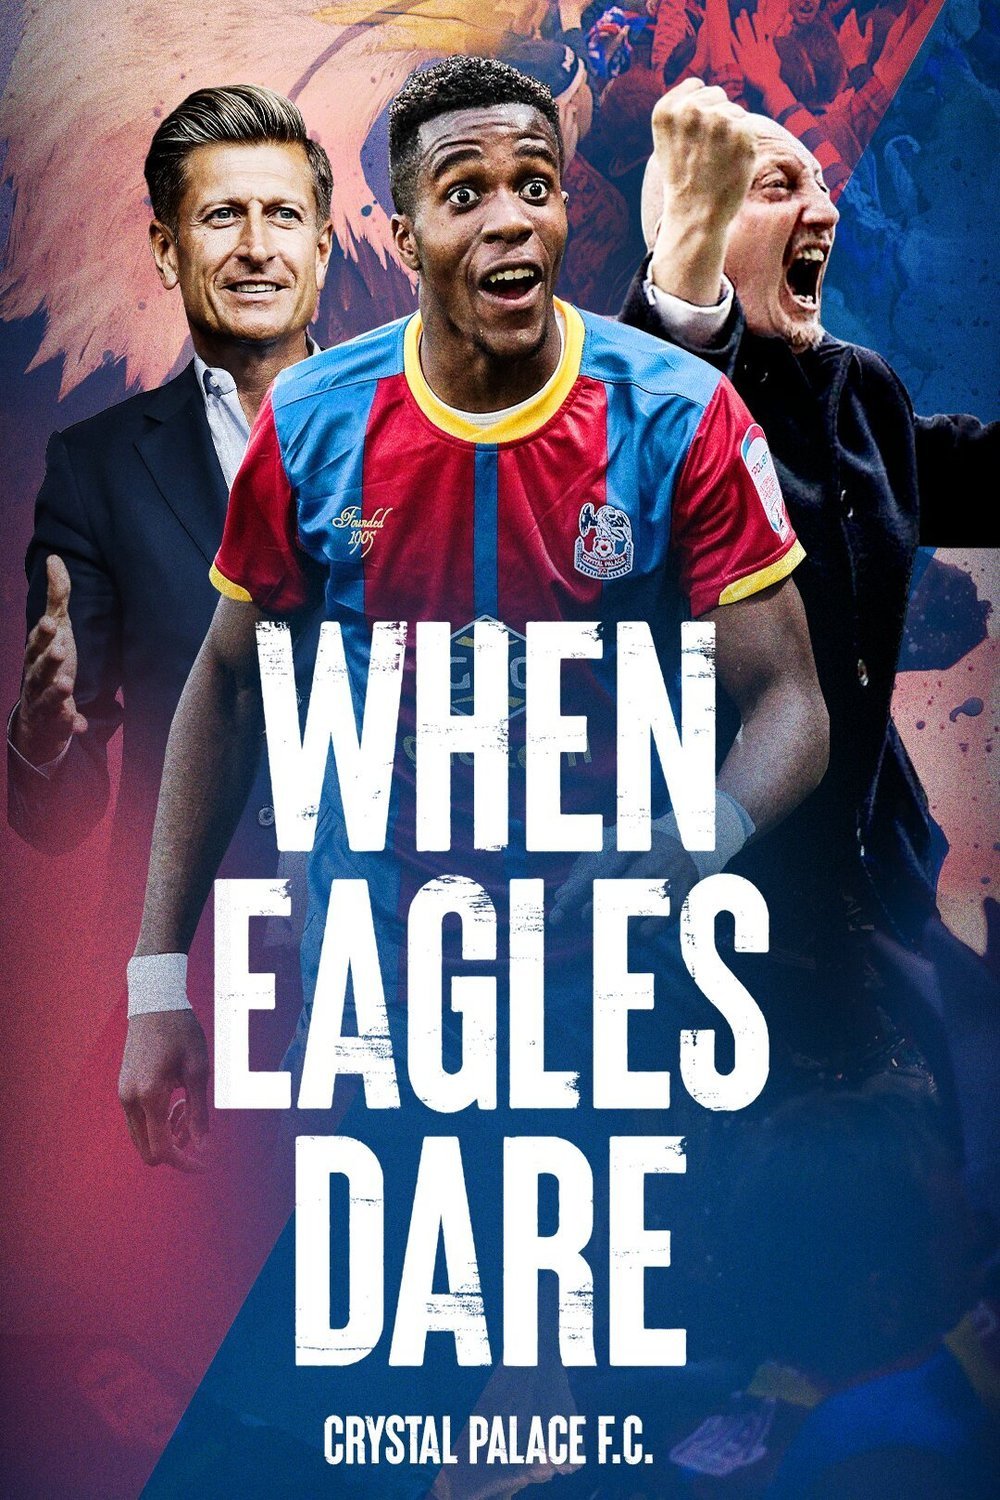 Poster of the movie When Eagles Dare: Crystal Palace F.C.